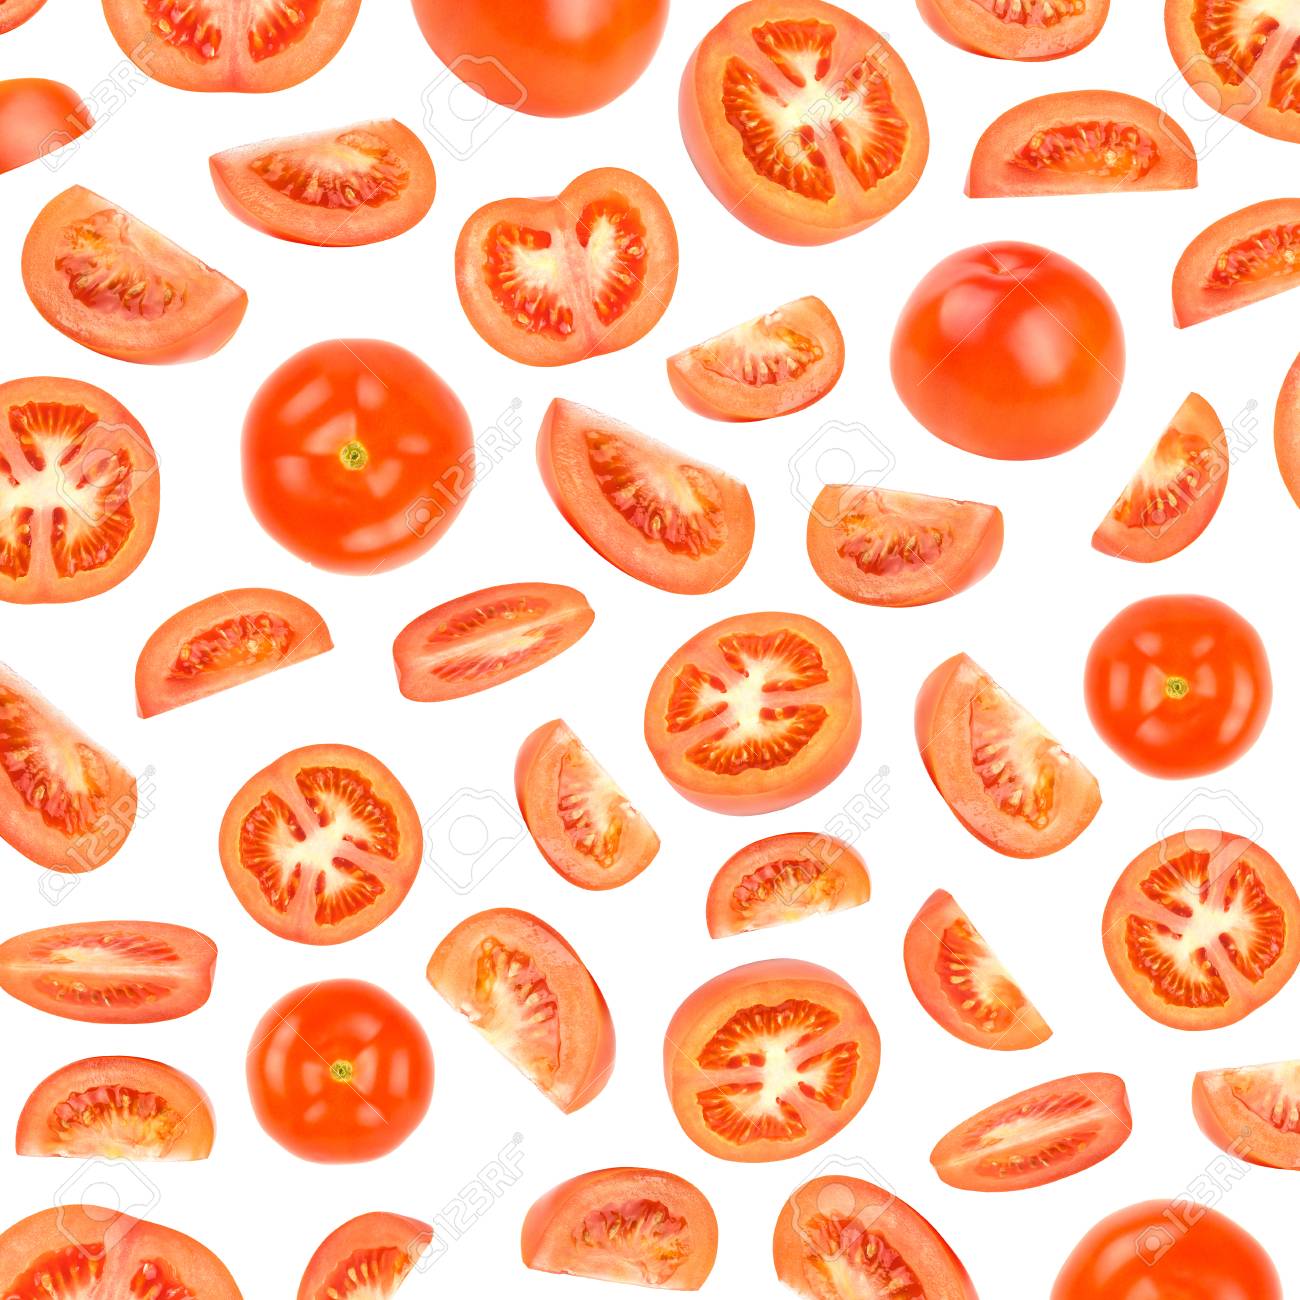 Fresh Red Tomato Photographic Pattern Wallpaper Isolated